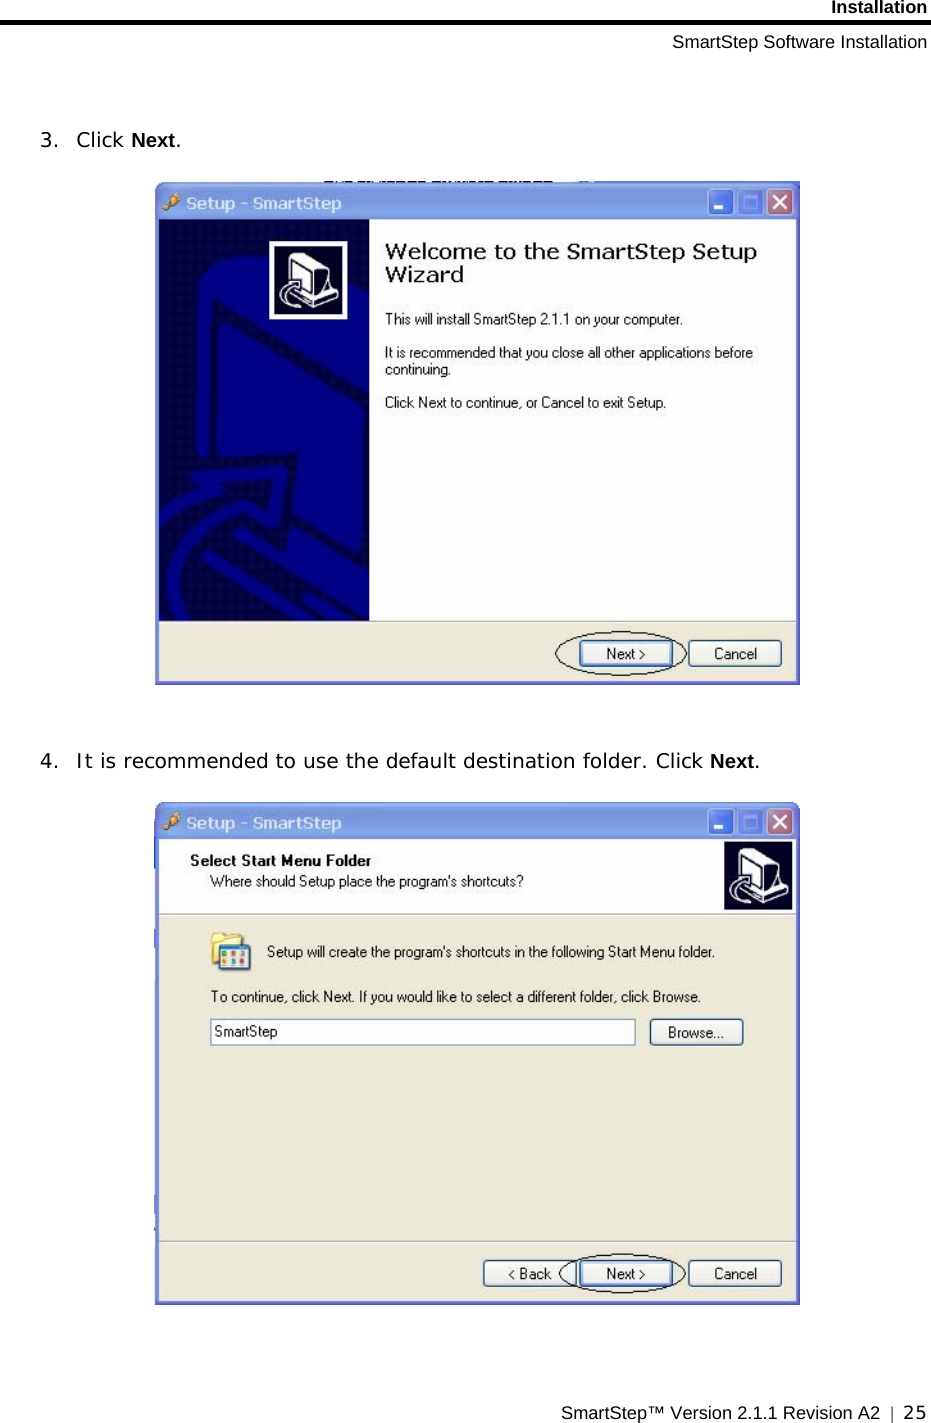 Installation SmartStep Software Installation SmartStep™ Version 2.1.1 Revision A2  |  25    3. Click Next.      4. It is recommended to use the default destination folder. Click Next.   